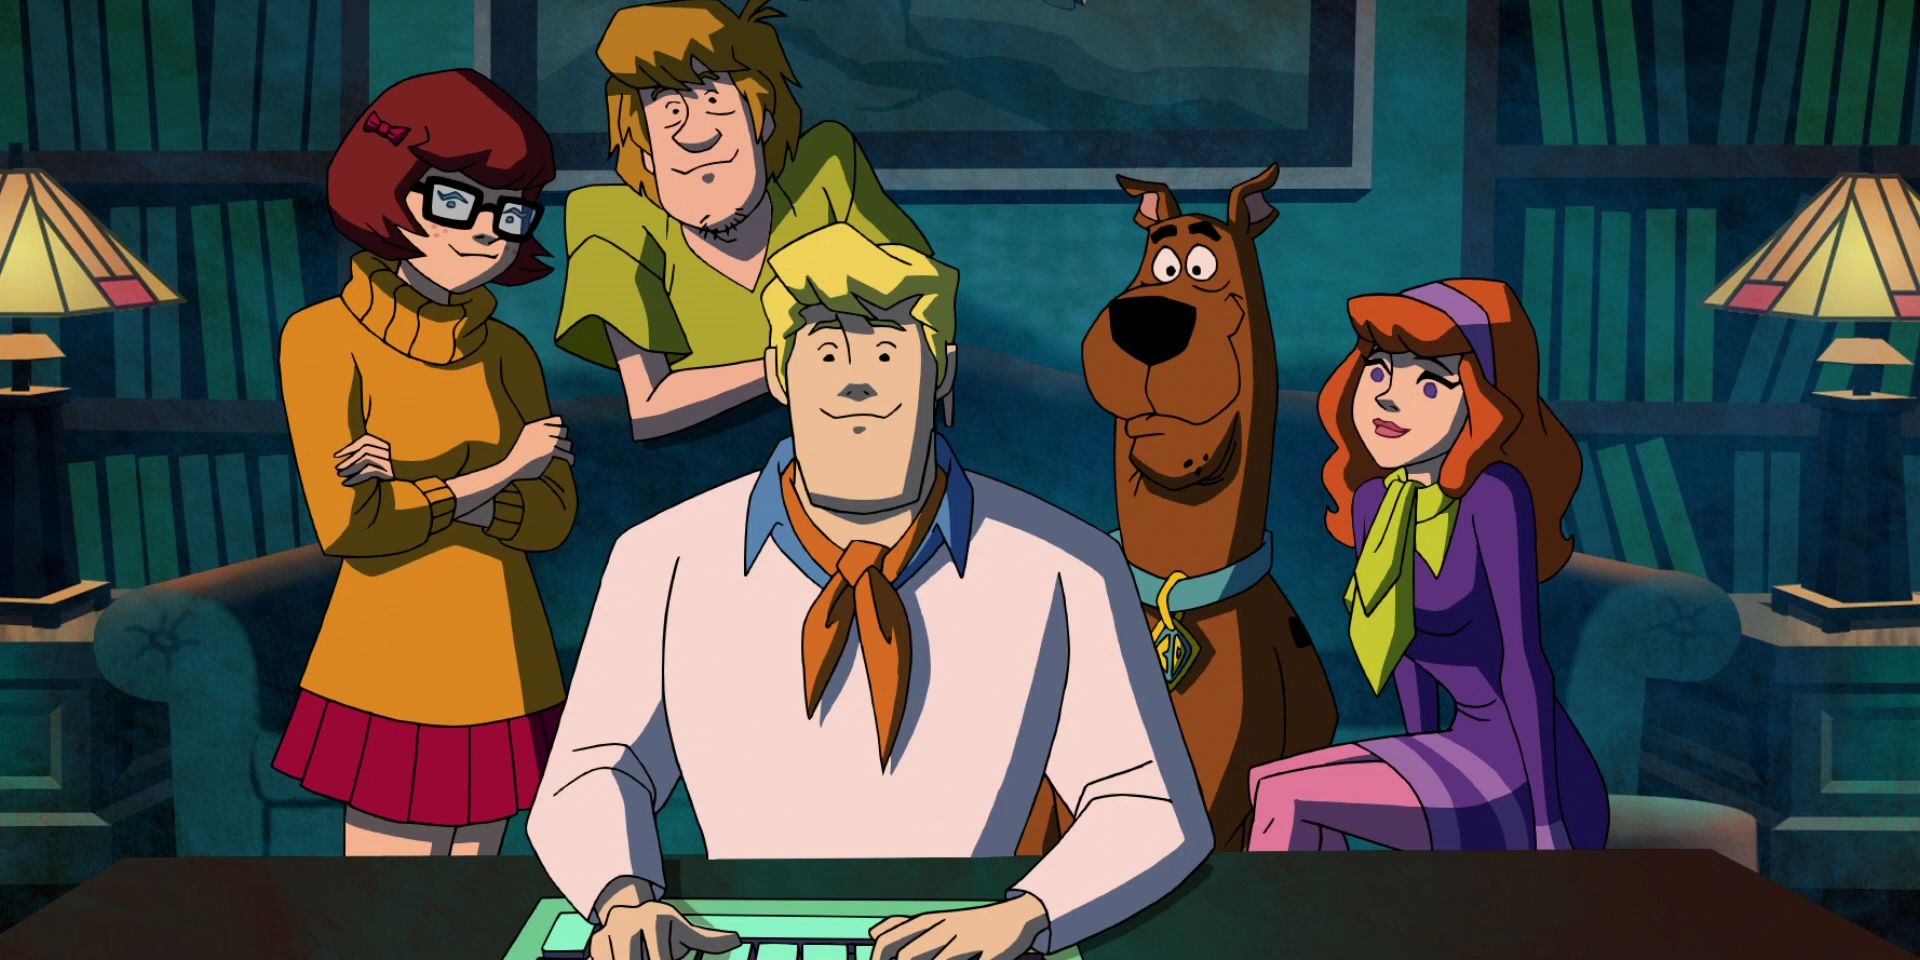 ScoobyDoo Every TV Series (In Chronological Order)